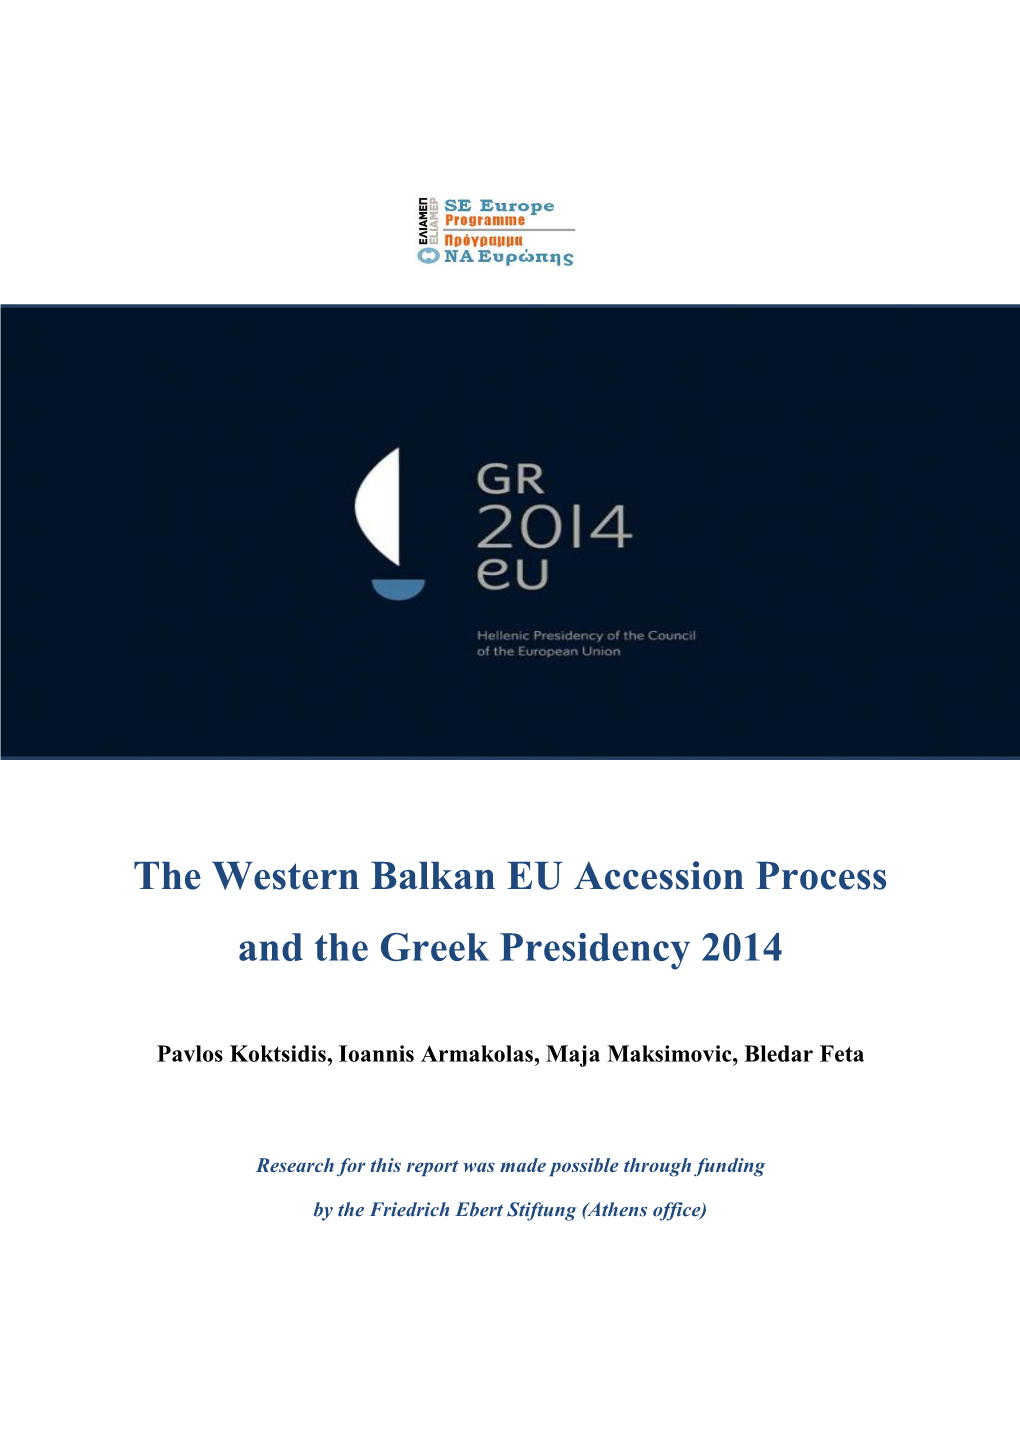 The Western Balkan EU Accession Process and the Greek Presidency 2014